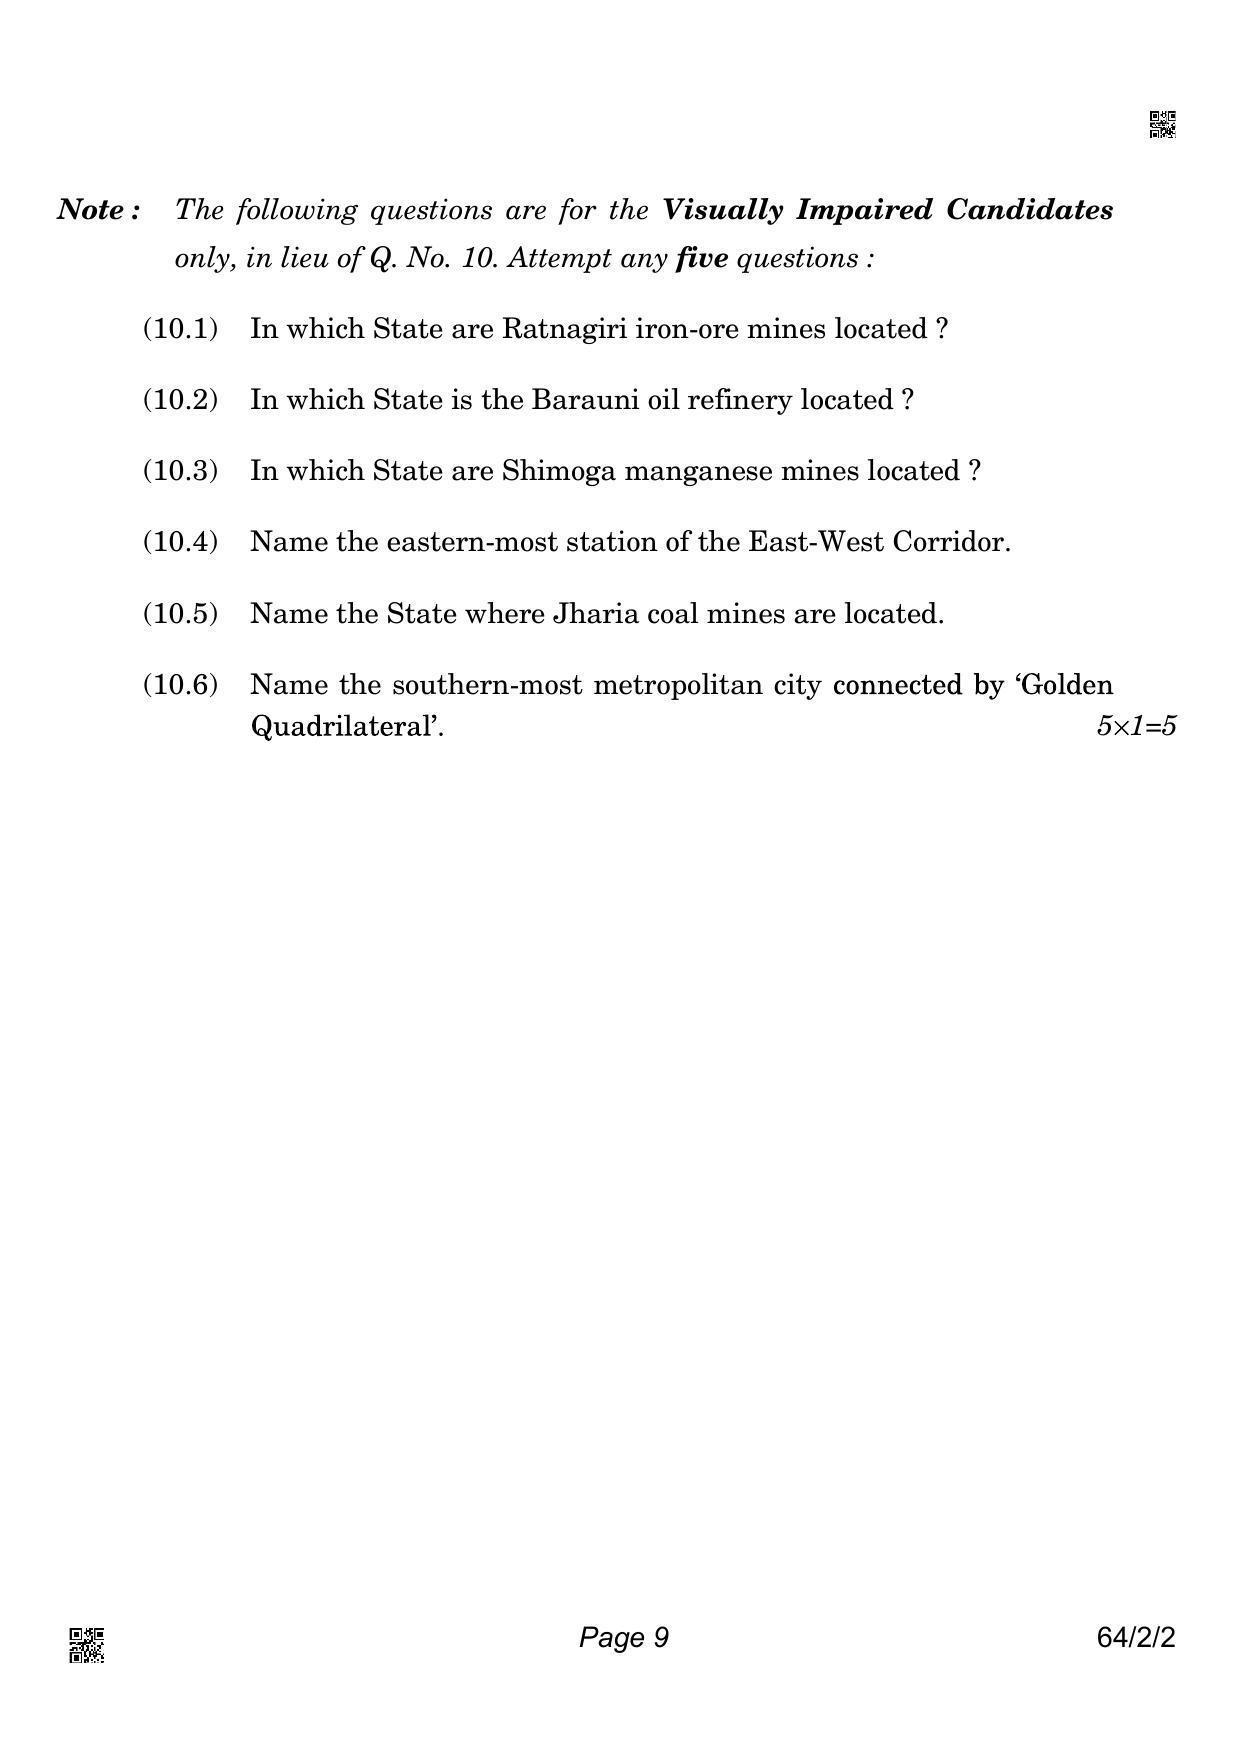 CBSE Class 12 64-2-2 Geography 2022 Question Paper - Page 9